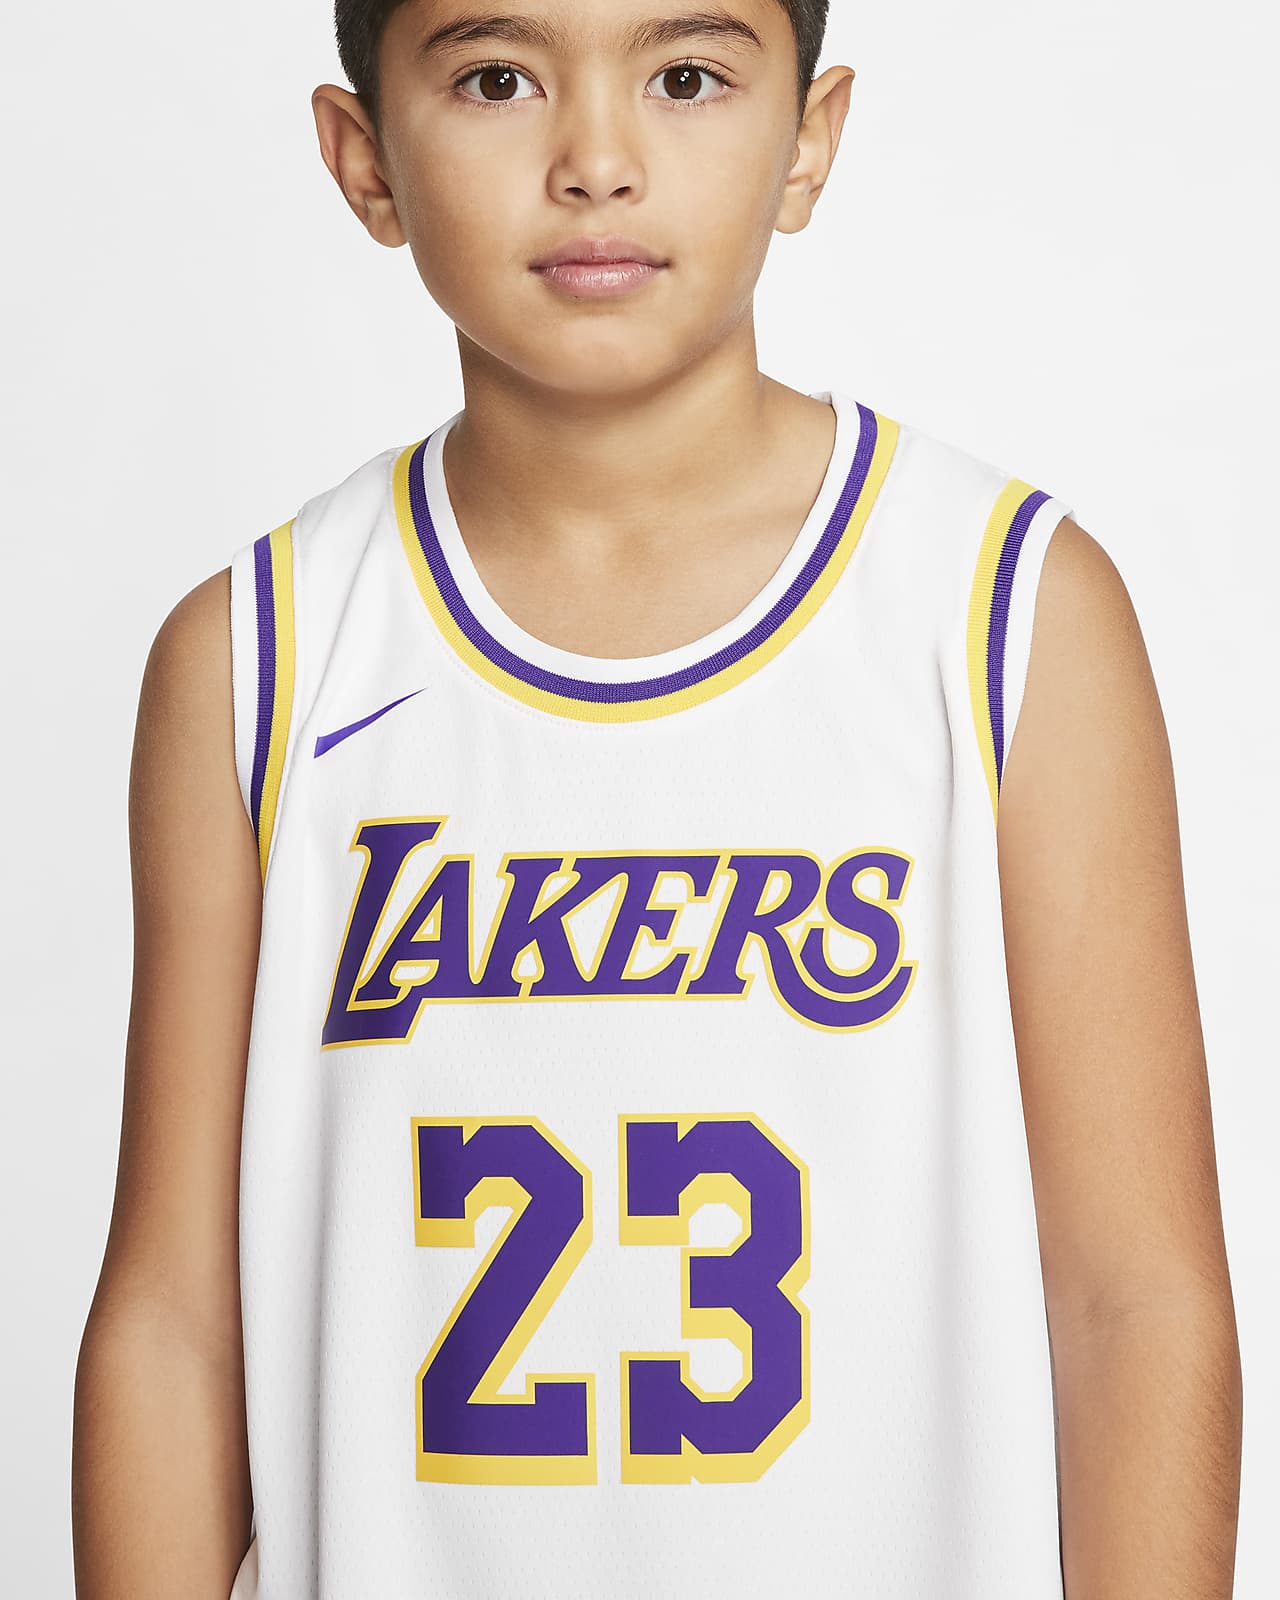 boys lebron james jersey Online Shopping mall | Find the best ...